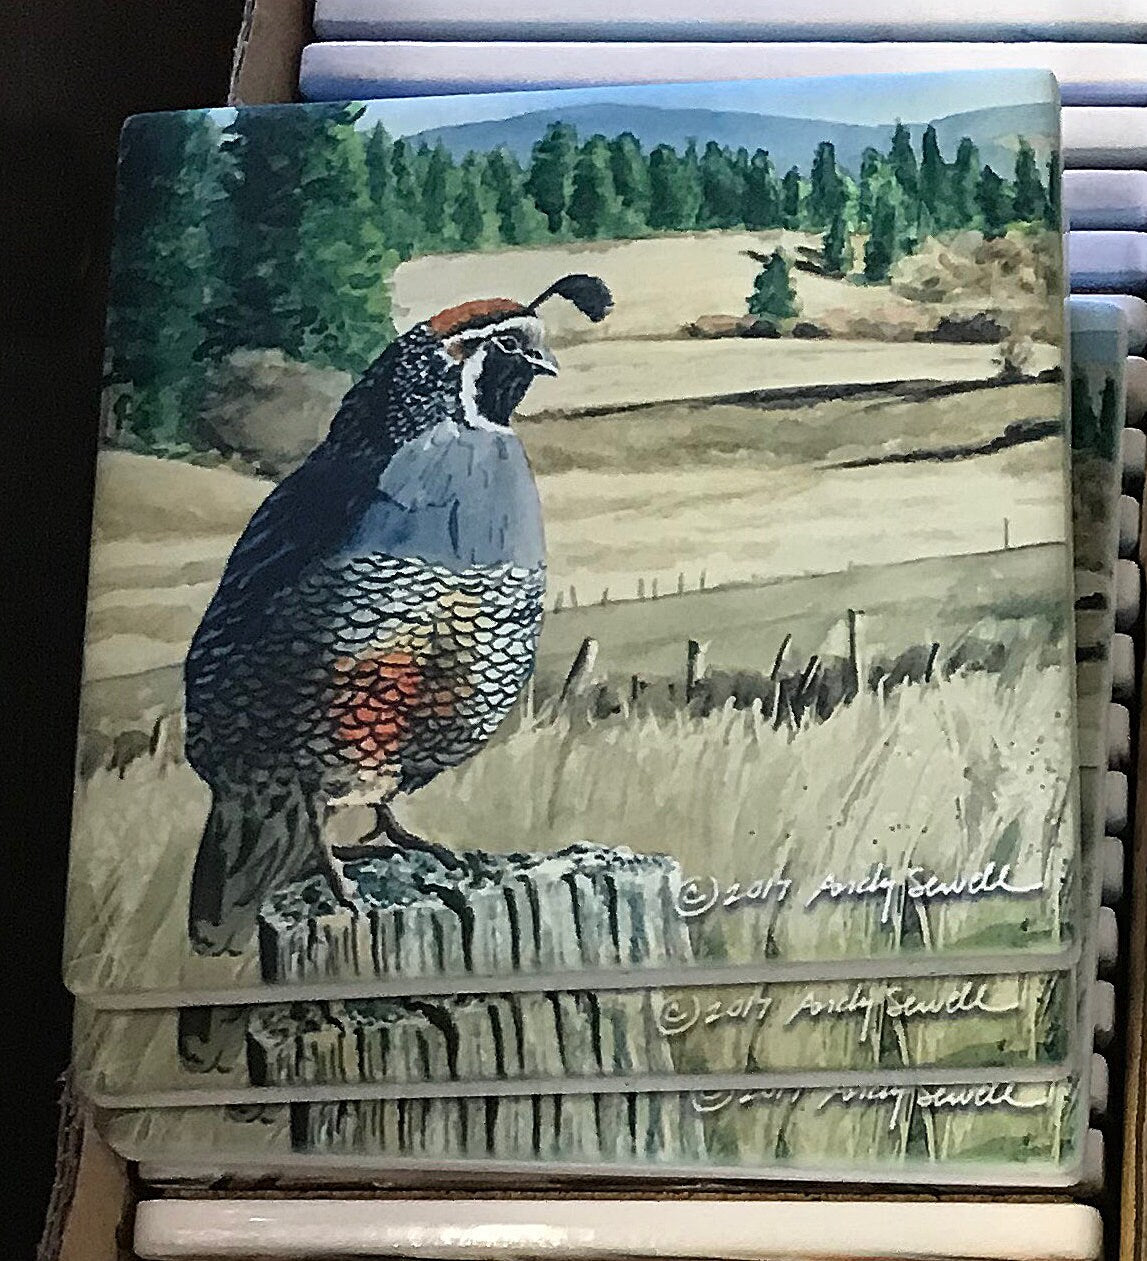 "KING of the VALLEY" A limited edition s/n Giclee reproduction of California quail art, watercolor print  - by Andy Sewell